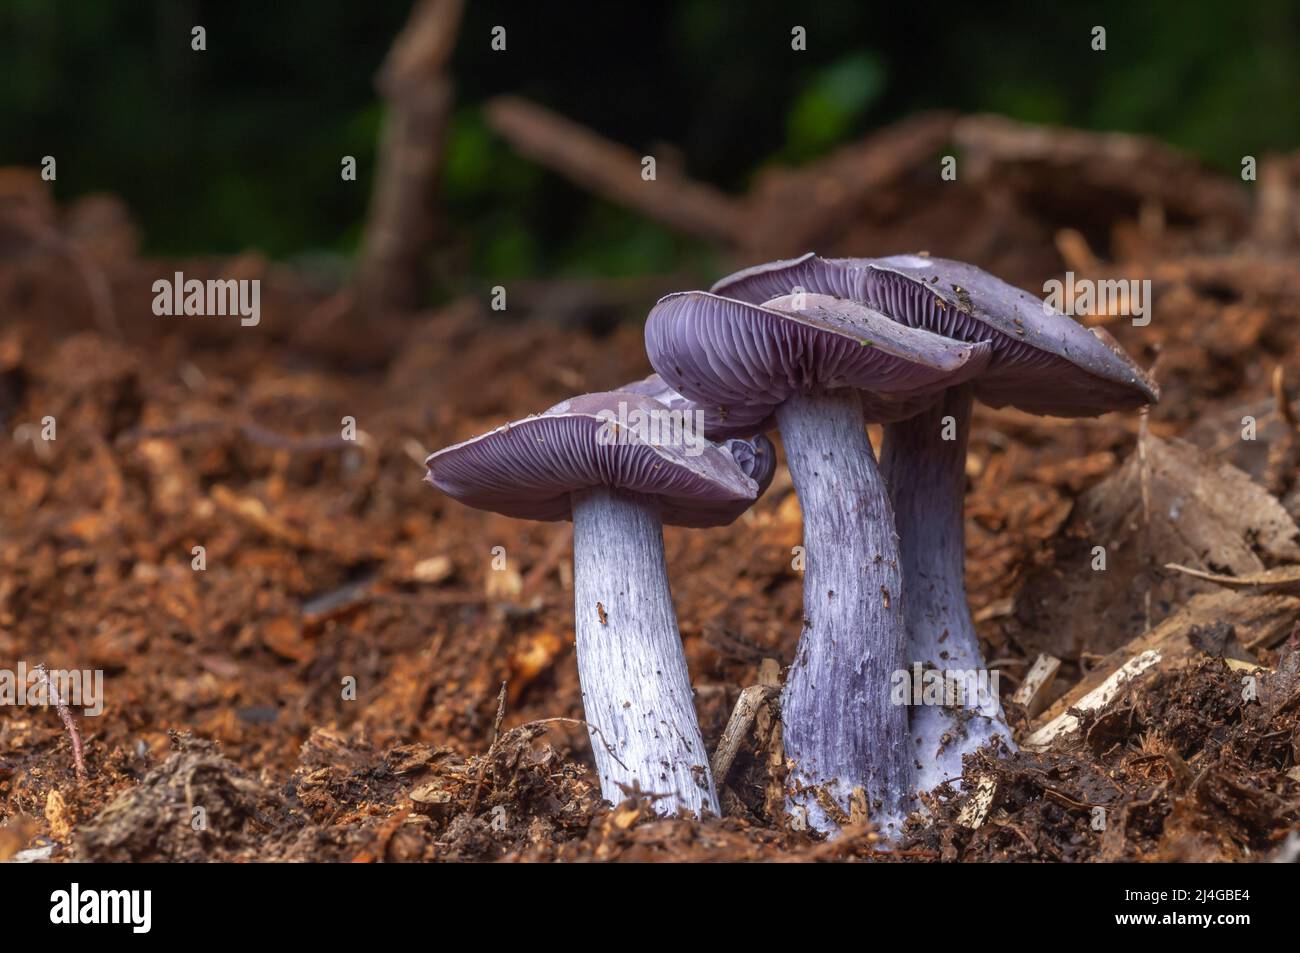 Wood Blewit (Lepista nuda) edible blue mushroom in a forest. Stock Photo